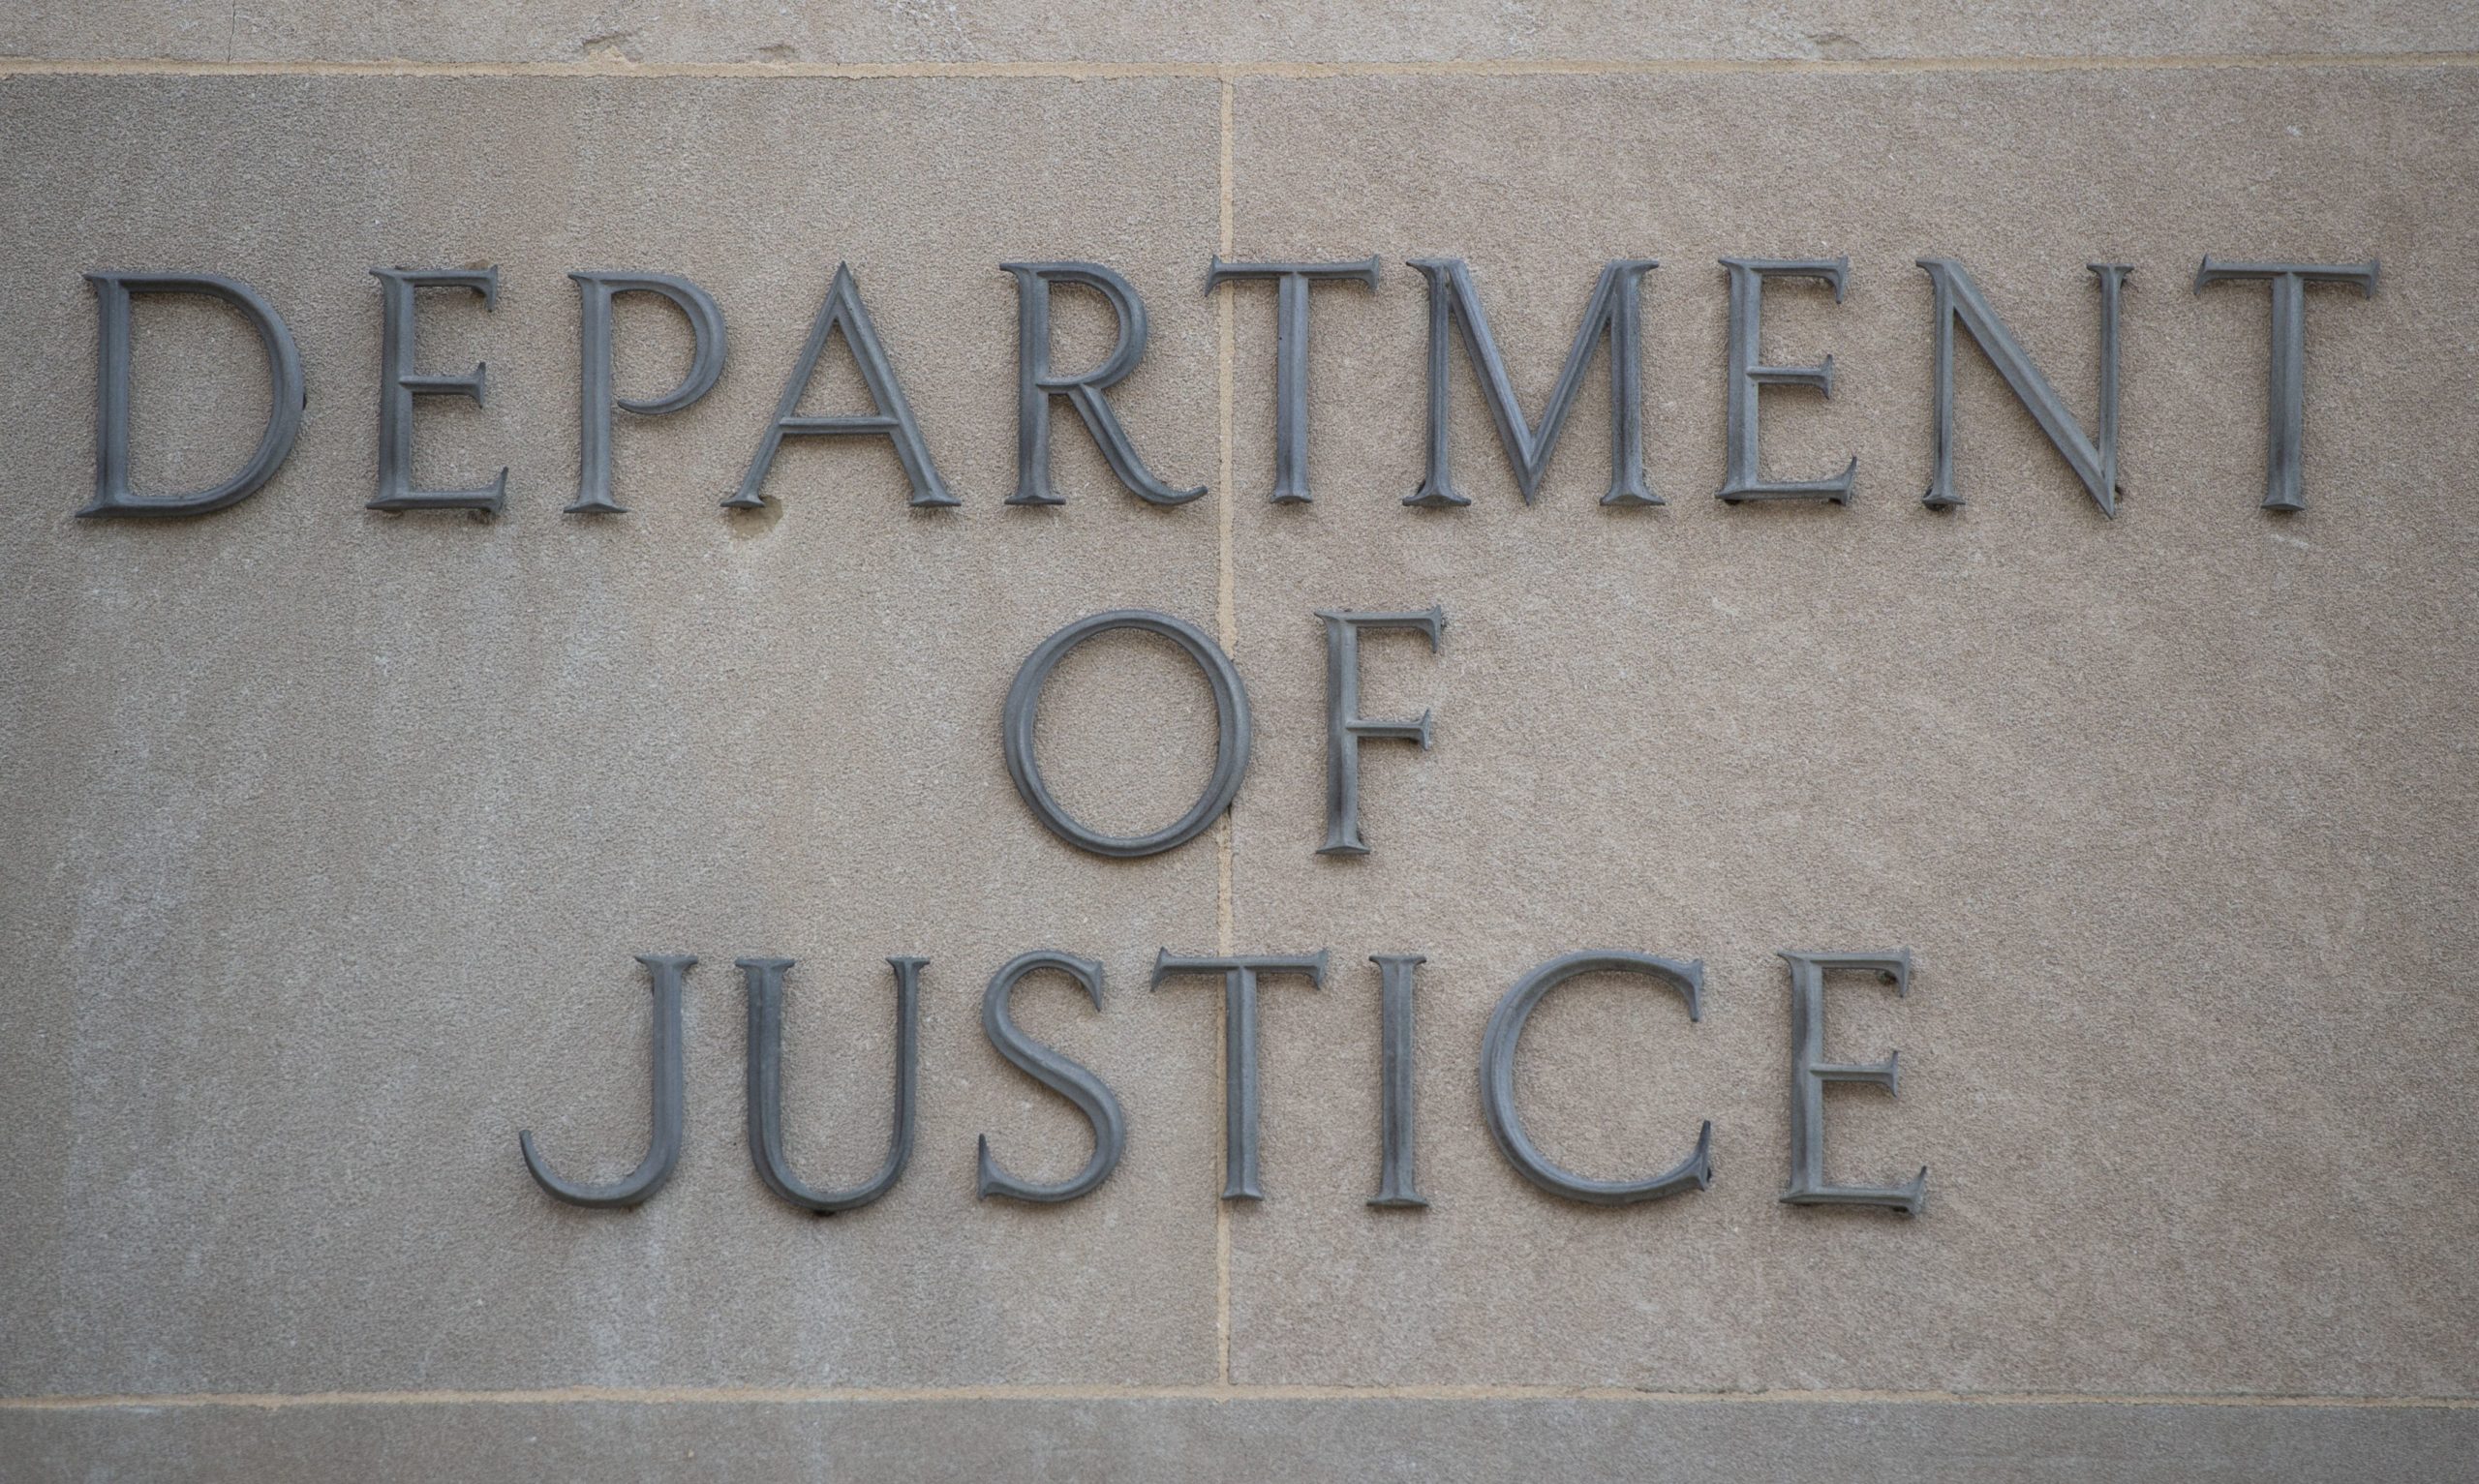 The US Department of Justice building is seen on the first work day for furloughed federal workers following a 35-day partial government shutdown in Washington, DC, January 28, 2019. - The five-week government shutdown subtracted $11 billion from the US economy, about twice the amount President Donald Trump sought to fund a border wall, an independent congressional body said Monday. (Photo by SAUL LOEB / AFP) (Photo by SAUL LOEB/AFP via Getty Images)